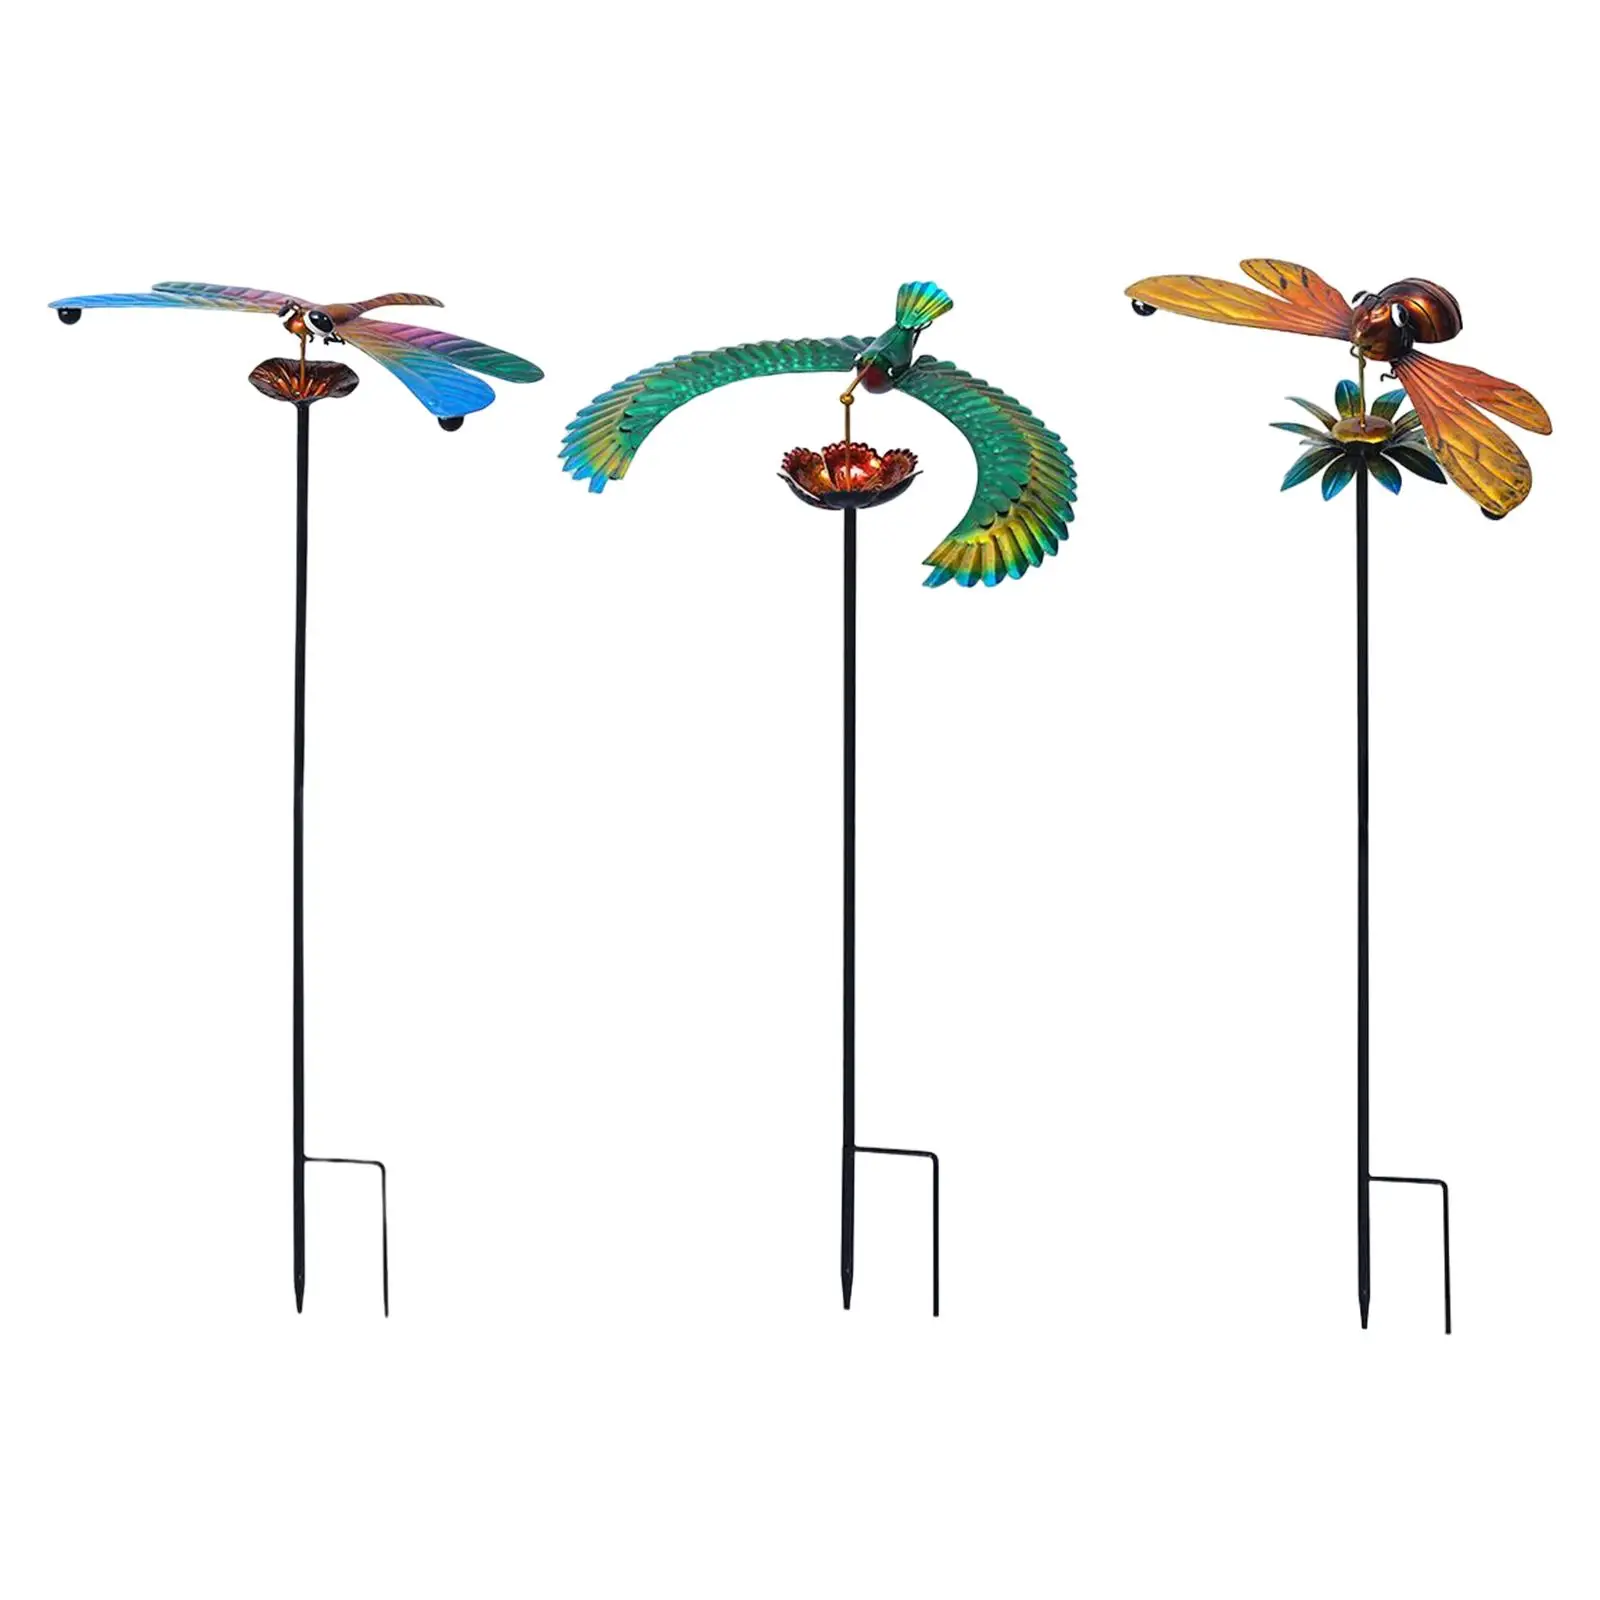 

Outdoor Garden Stakes Decor Yard Ornament Figurines Sculpture Animals Statues for Pathway Outdoor Patio Yard Lawn